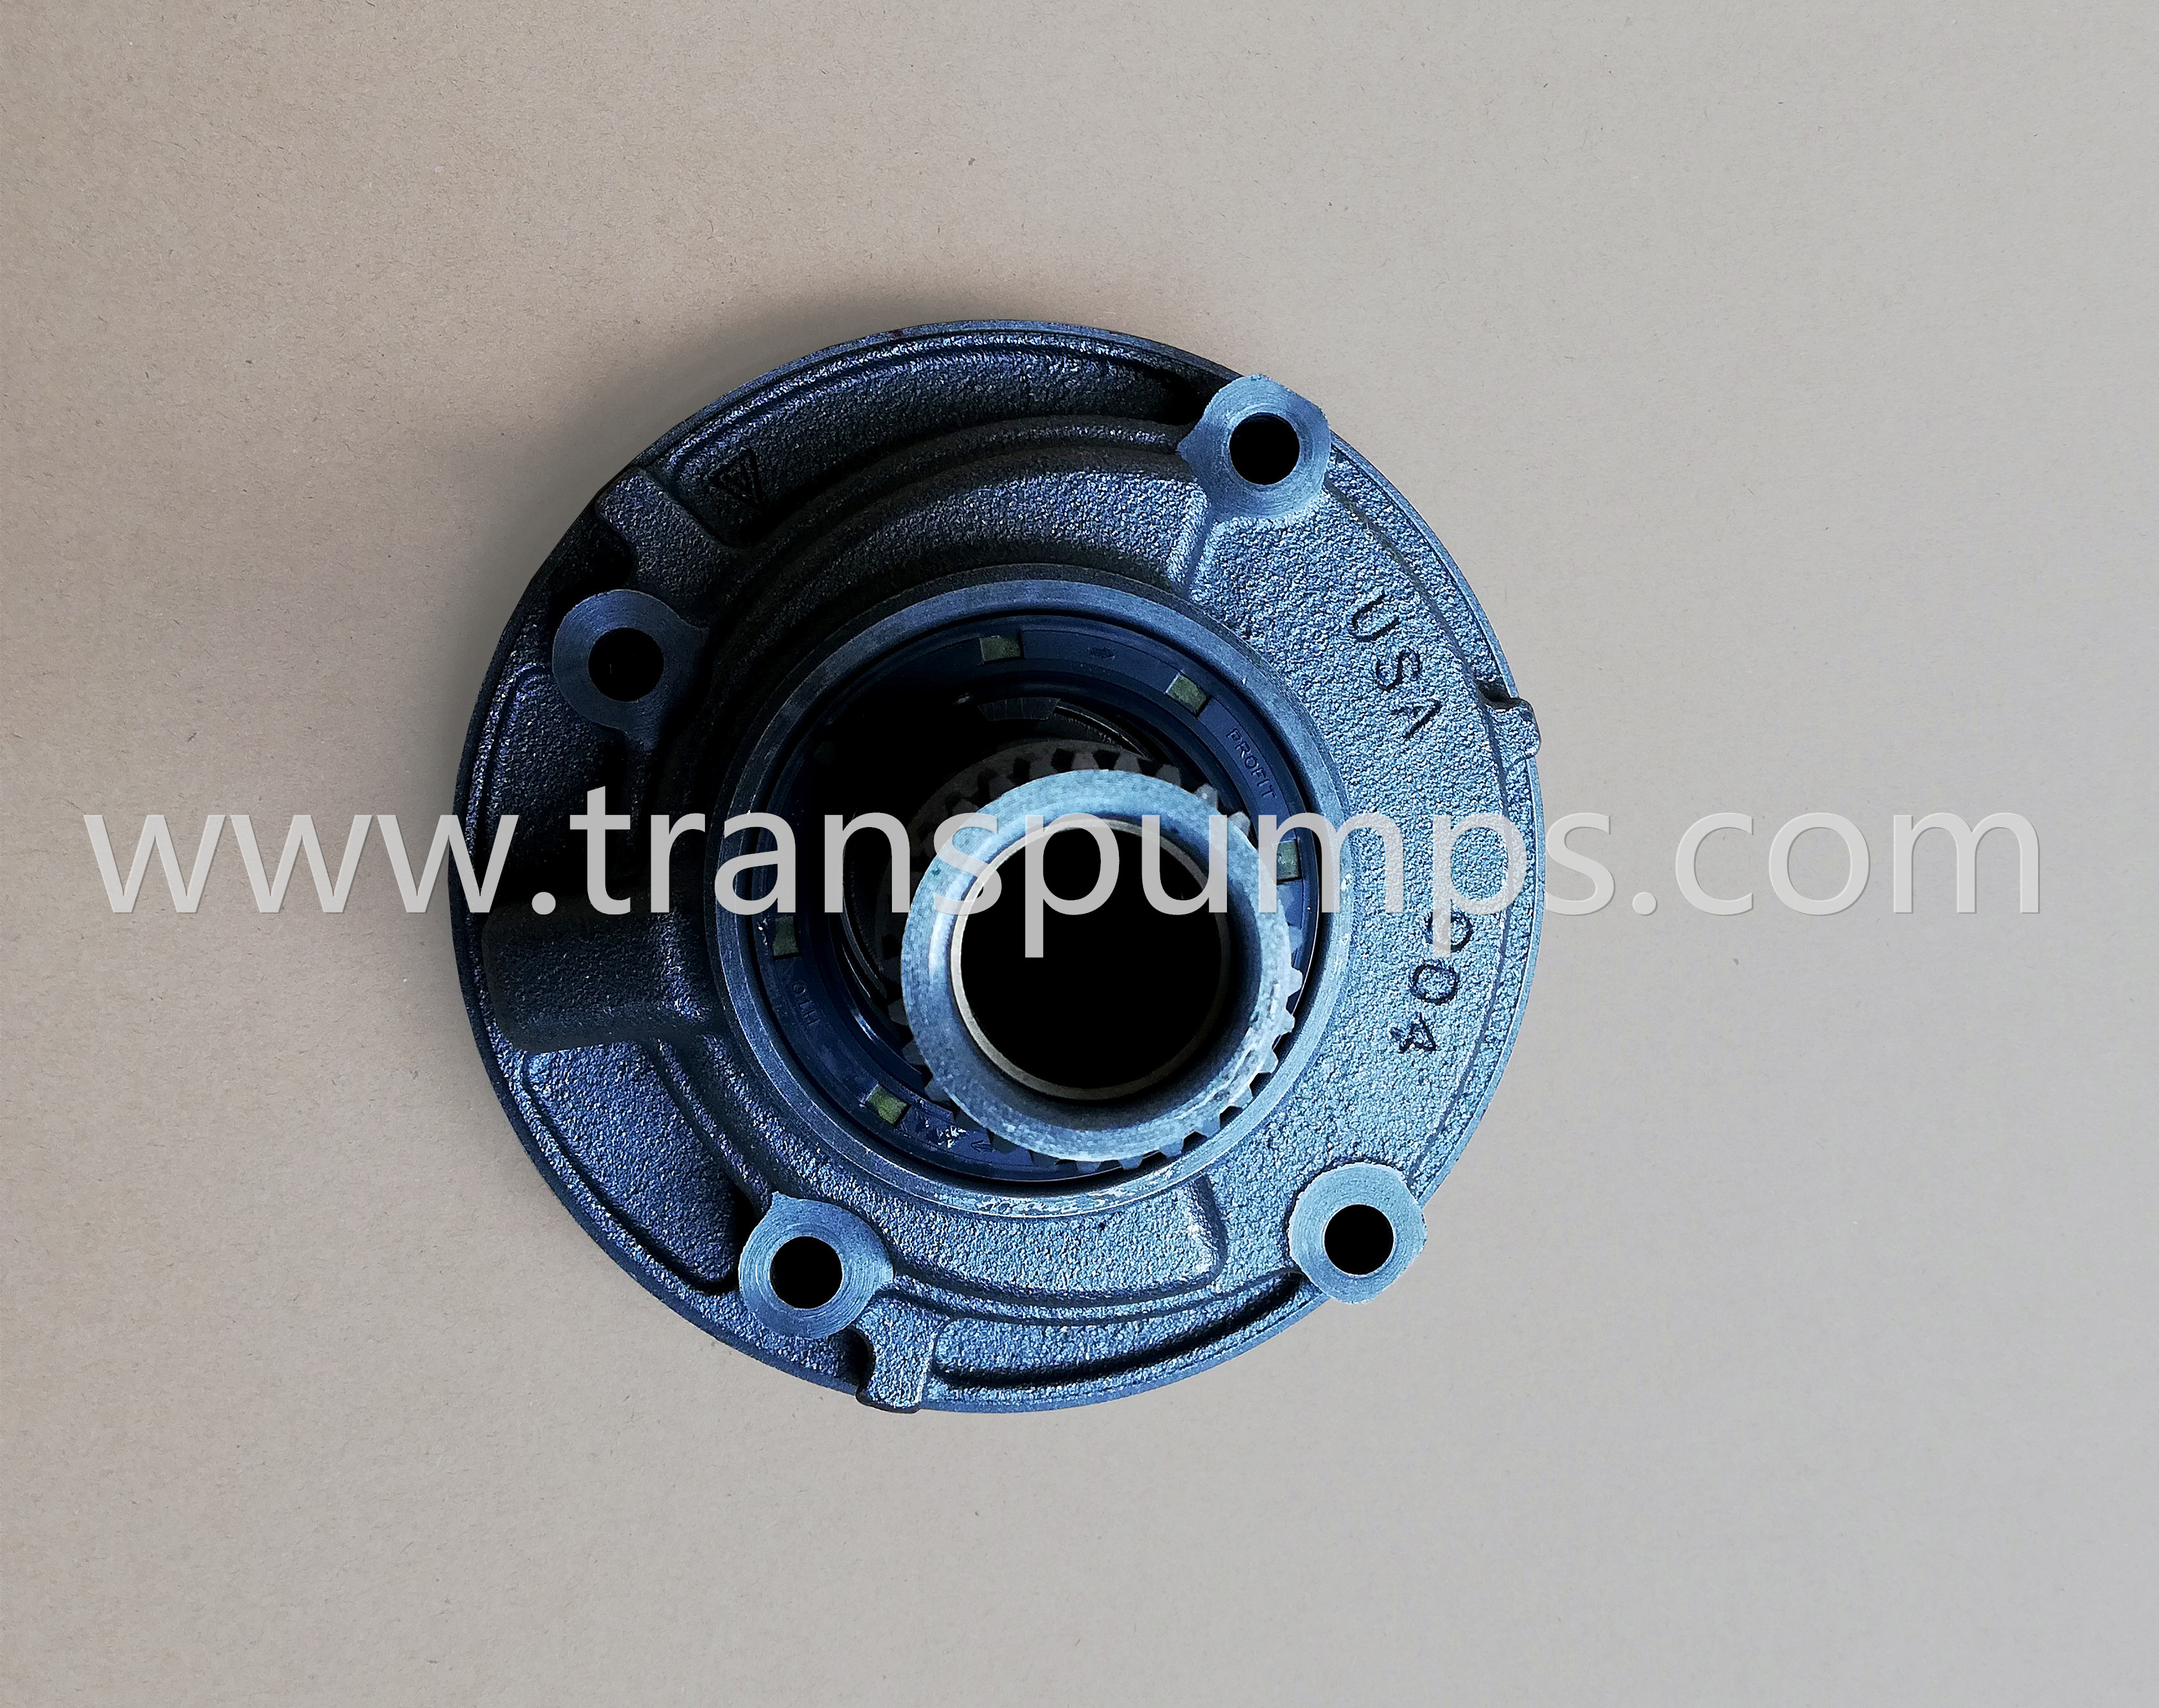 Case torque charge pump, transmission charge pump for CASE machine, CASE transmission oil pump assembly, transmission pump for sell, transmission pump for CASE, transmission oil gear pump, New aftermarket transmission charge oil pump assembly, transmission pump CASE machines, US OEM transmission pump CASE machines, shuttle transmission charge pump, new aftermarket hydraulic pump, case backhoe hydraulic pump, case backhoe fuel pump,case 580 fuel pump, case hydraulic pump,case 580k lift pump, case 580 lift pump, case 580l lift pump,case lift pump, case pump price, case pumps,case pump 580k, case 685 hydraulic pump, case 580k transmission pump, case 580k transmission pump, case 580l transmission pump,case 580d transmission pump, case 580 super k transmission pump, case 580 super transmission pump.Backhoe pump, backhoe main pump,backhoe fuel pump, backhoe charge pump，pumpa hidraulike，CASE transmission charging pump for backhoe loader, part no: 137093A1